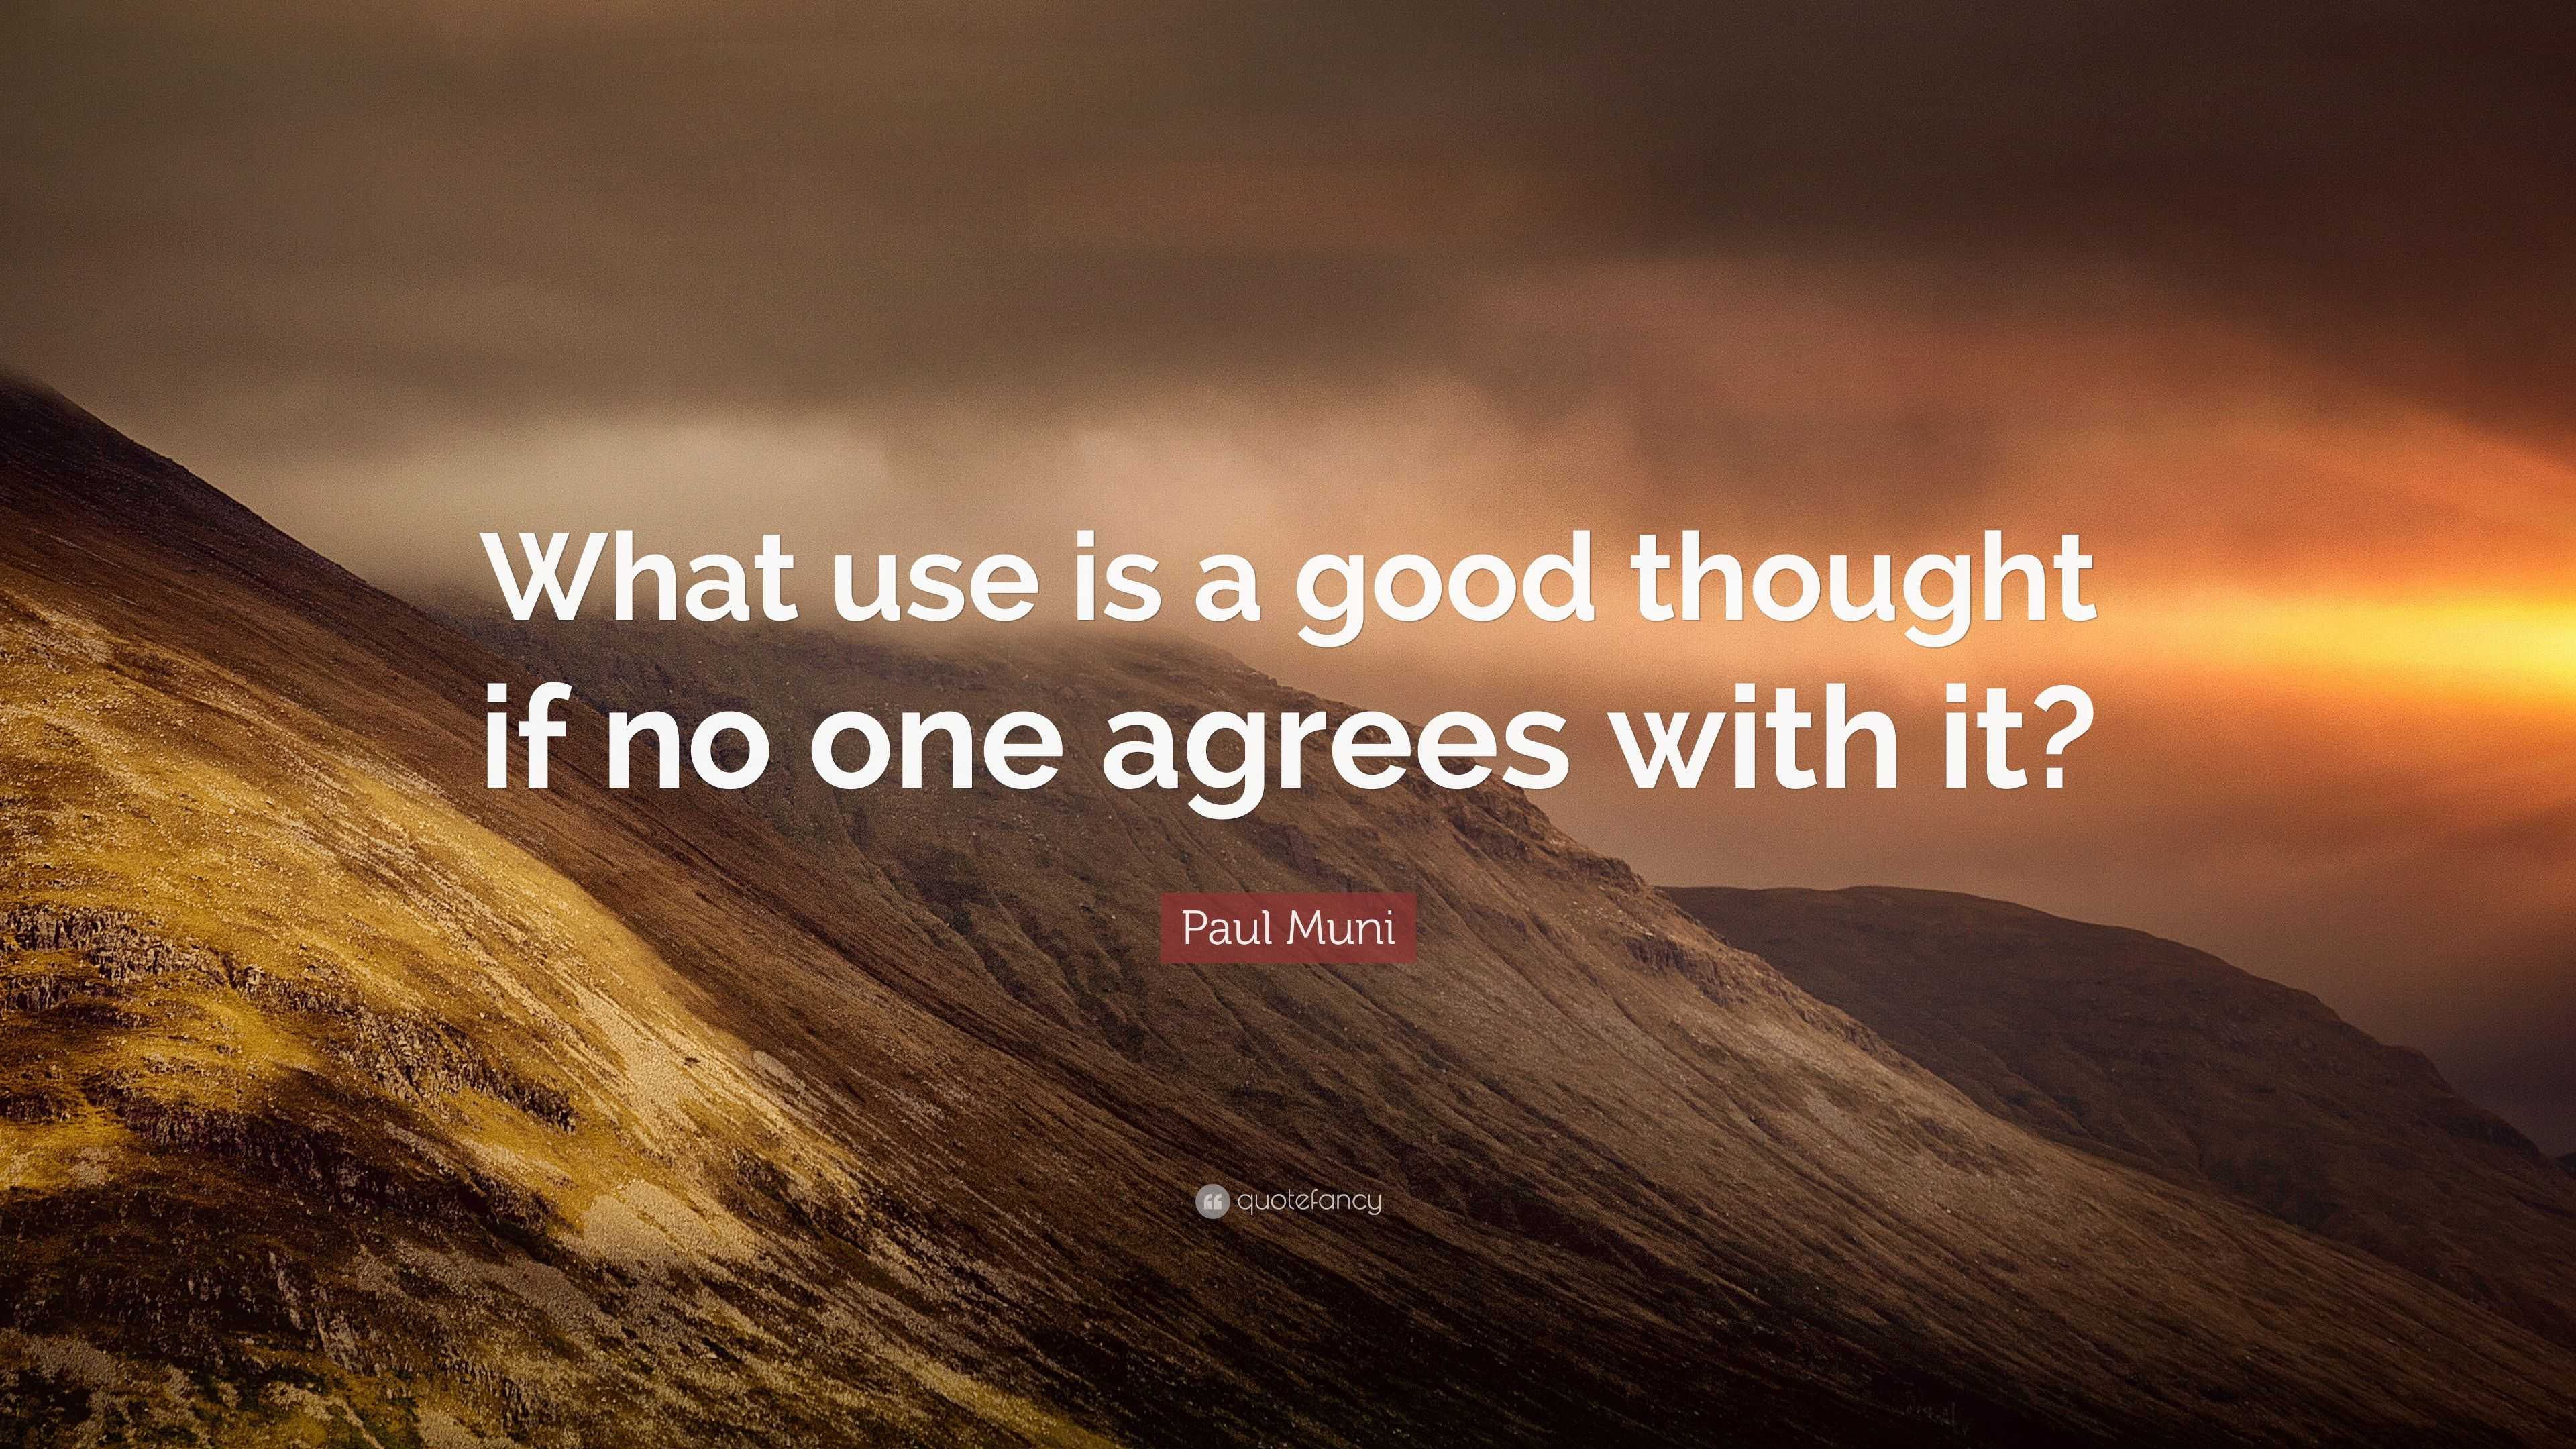 Paul Muni Quote: “What use is a good thought if no one agrees with